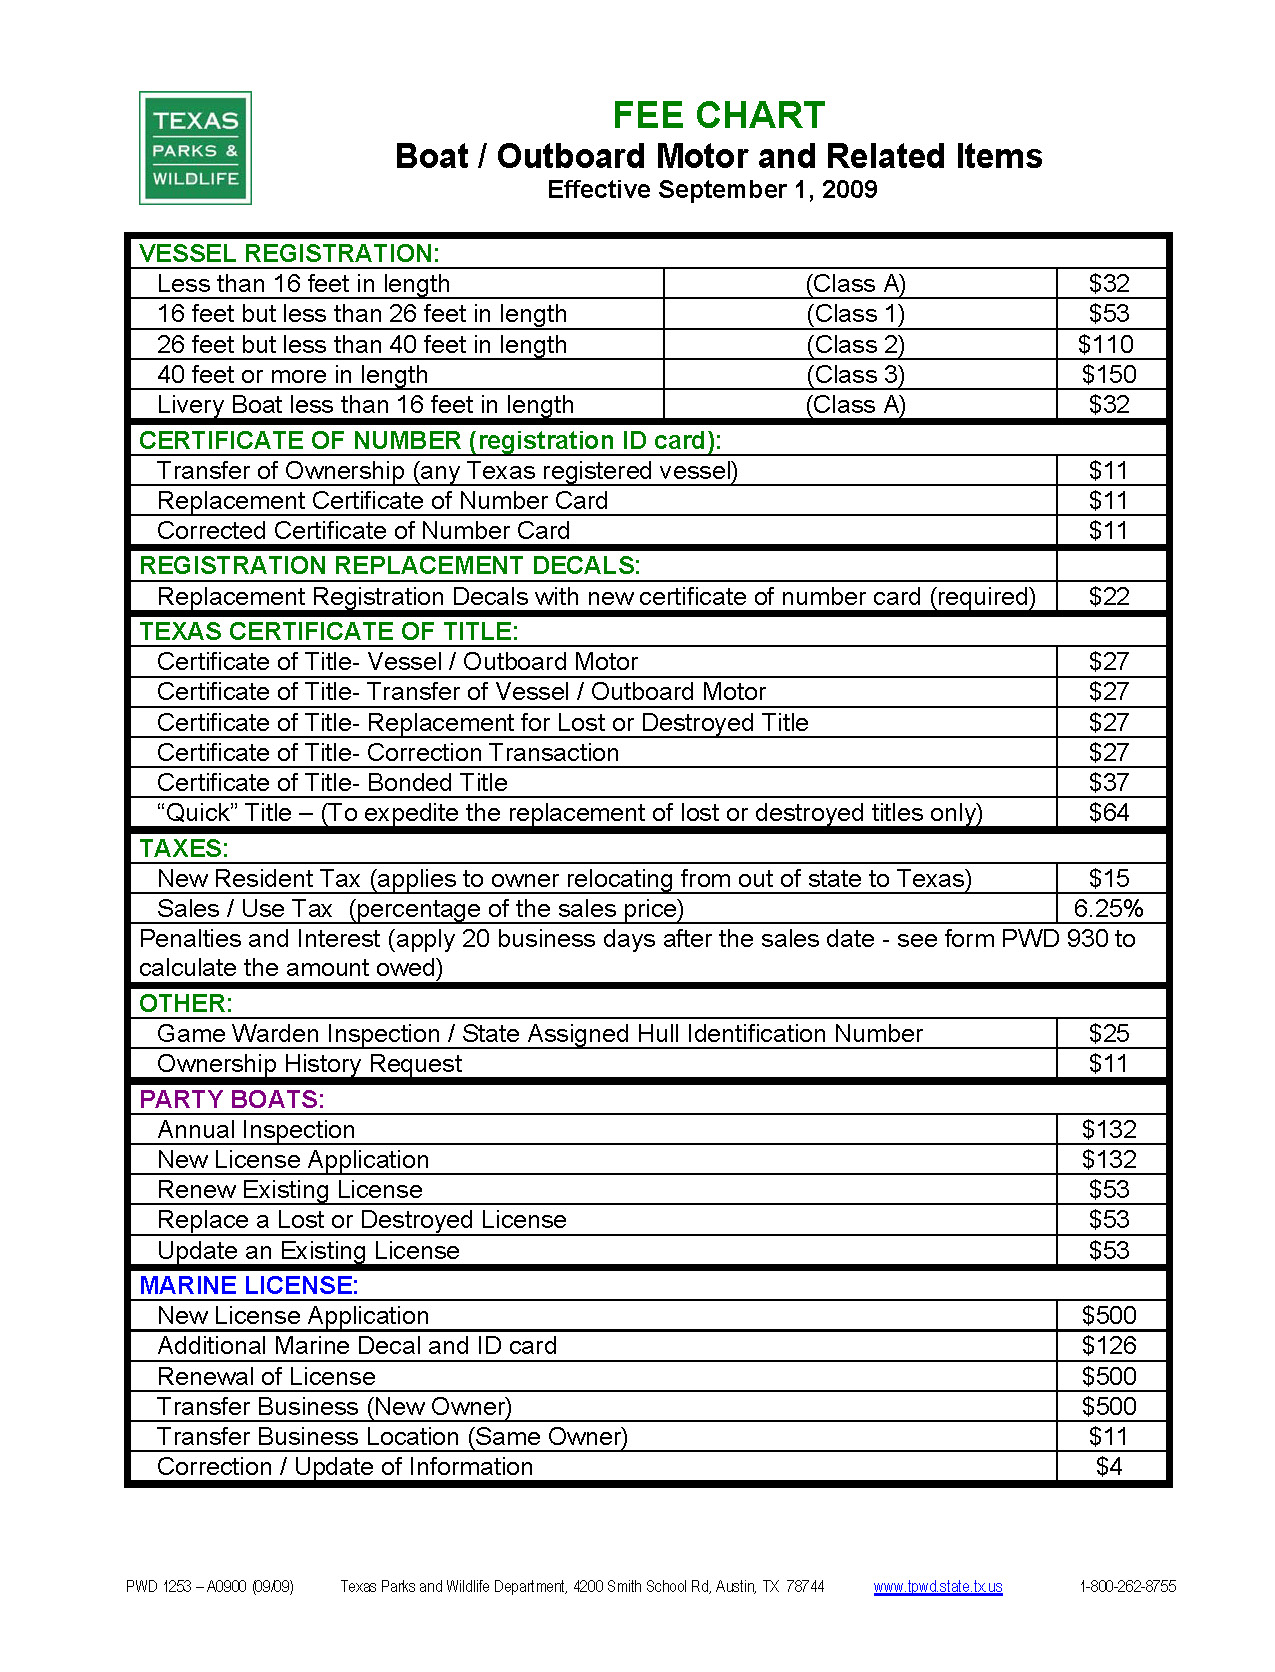 Texas Parks And Wildlife Boat Registration Fee Chart